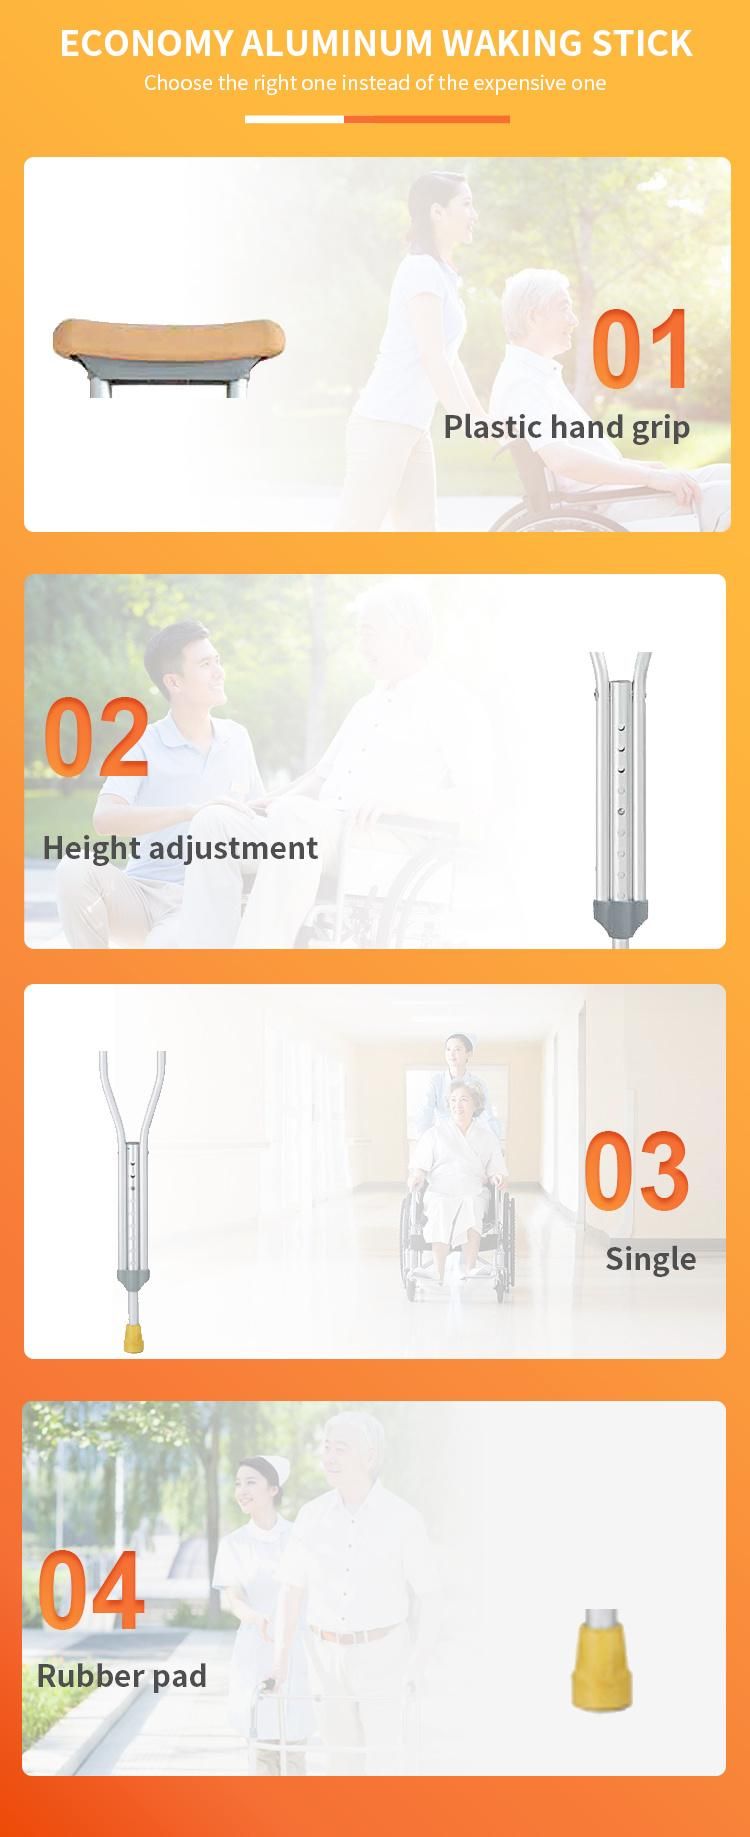 Small Size Aluminum Crutches for Disable People and Old Man Support Walk Lightweight Adjust Height Aluminum Walking Stick Crutch